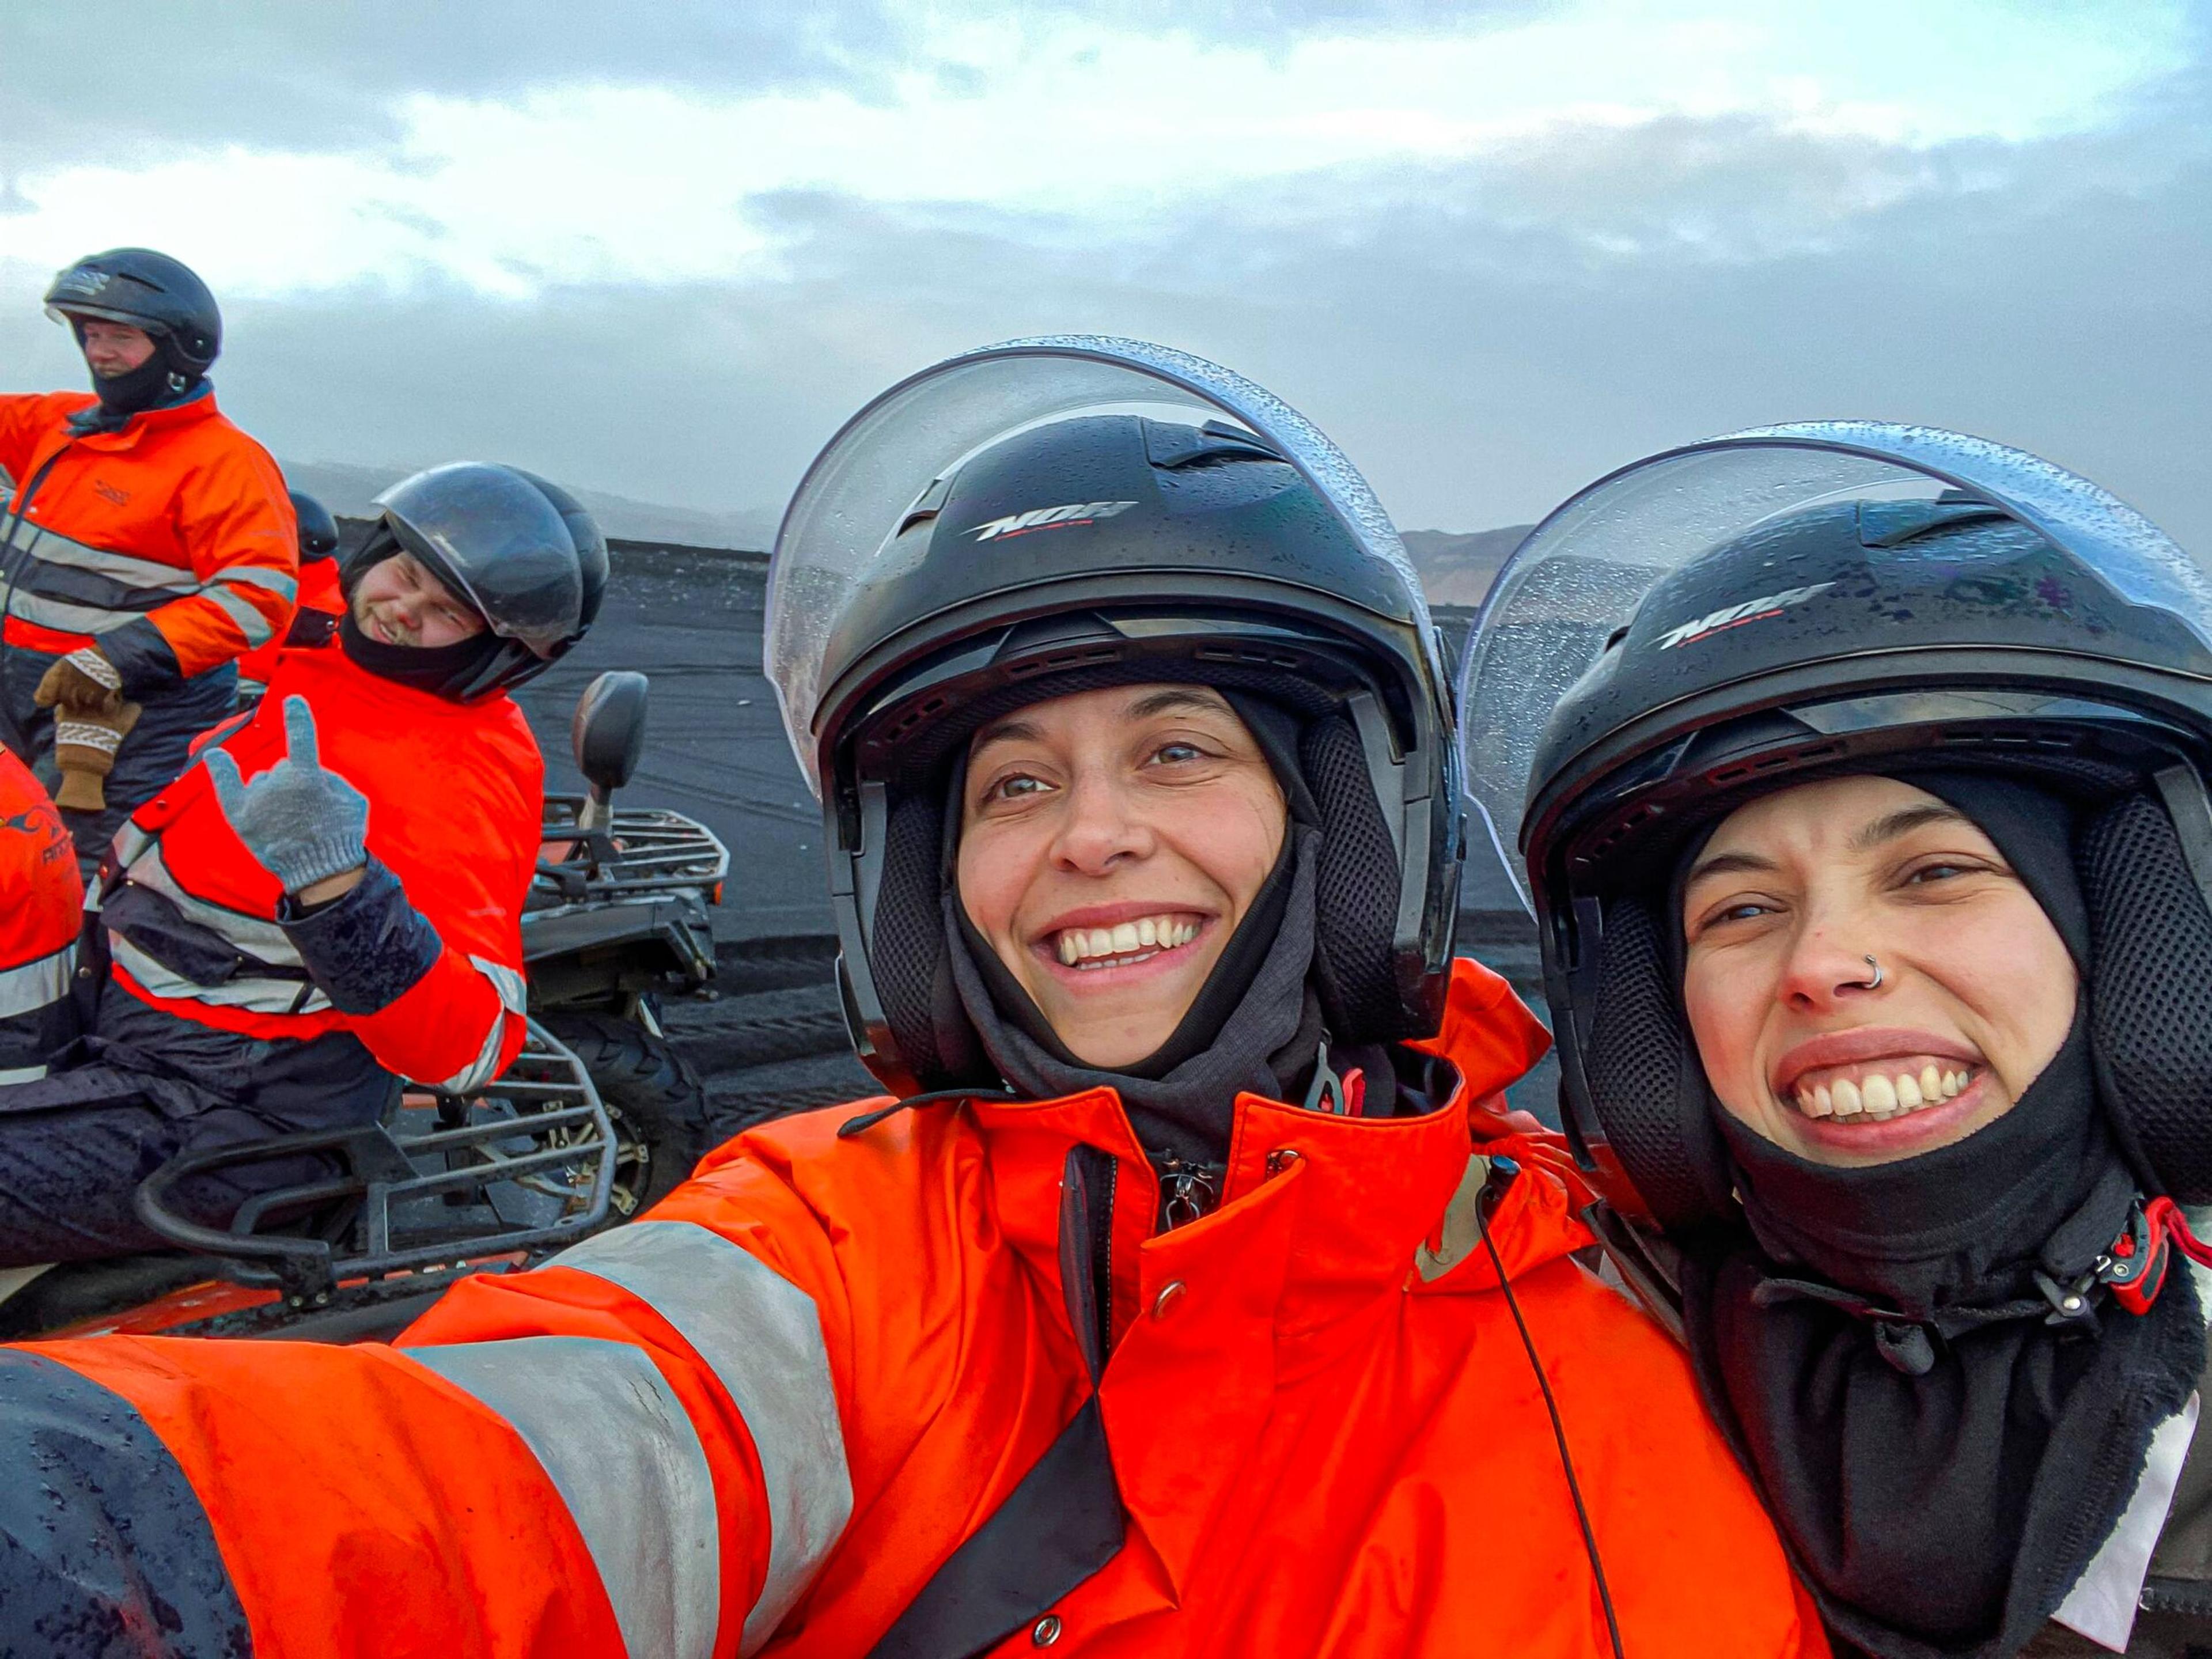 Two people in orange safety suits and helmets taking a selfie.